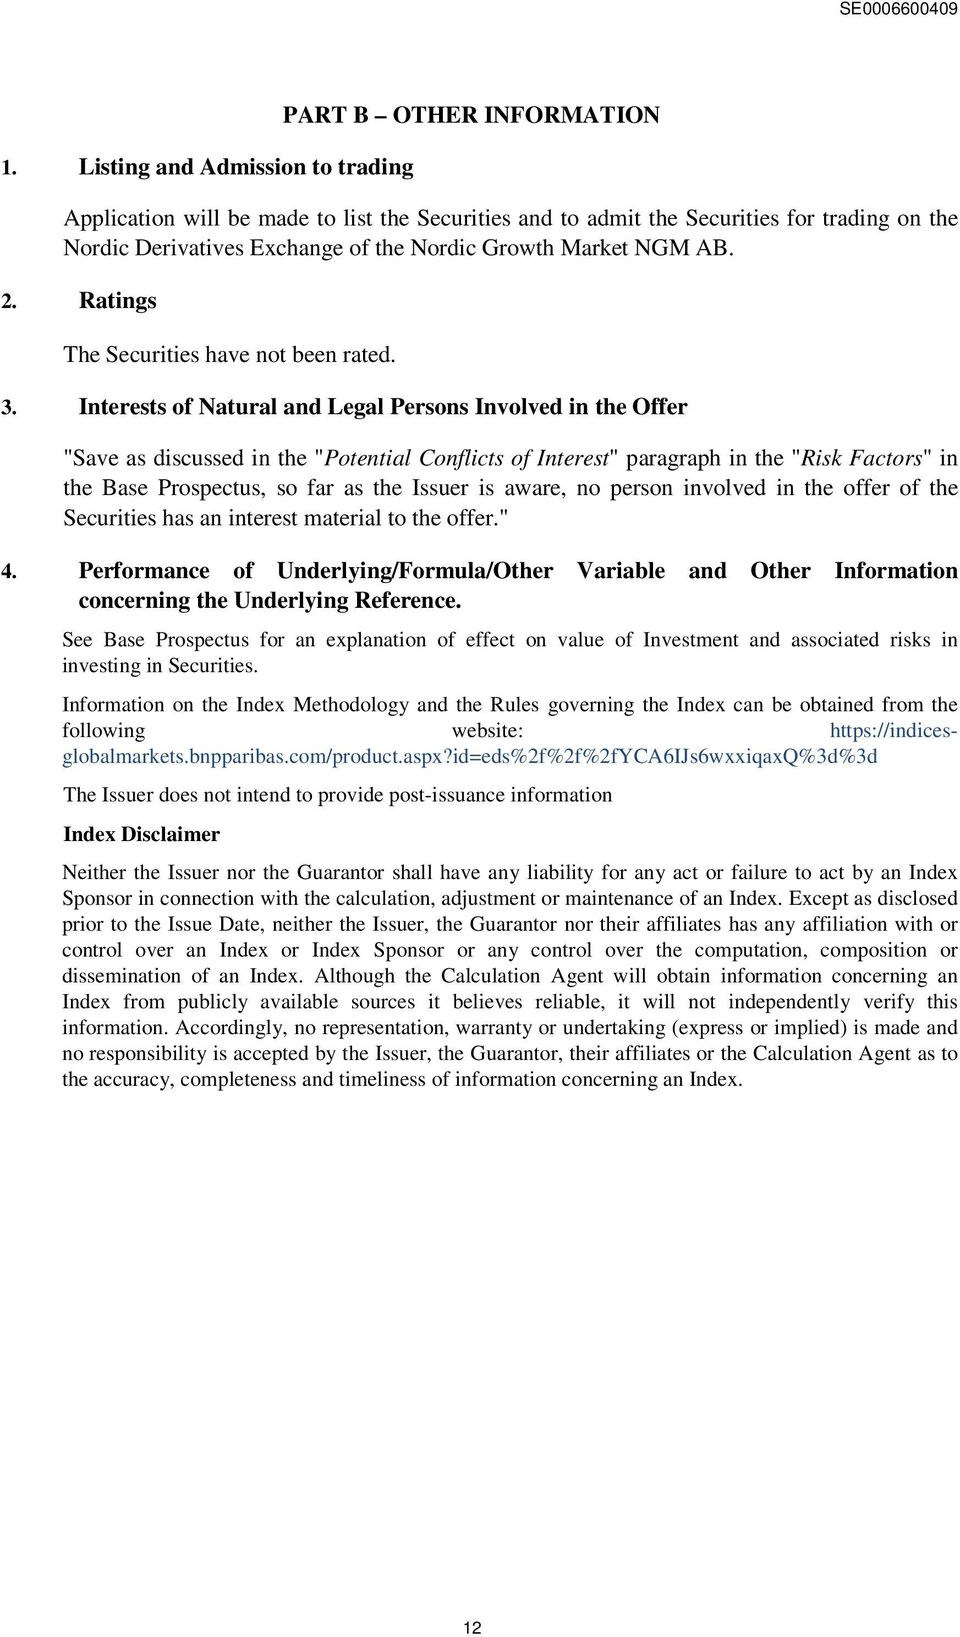 Interests of Natural and Legal Persons Involved in the Offer "Save as discussed in the "Potential Conflicts of Interest" paragraph in the "Risk Factors" in the Base Prospectus, so far as the Issuer